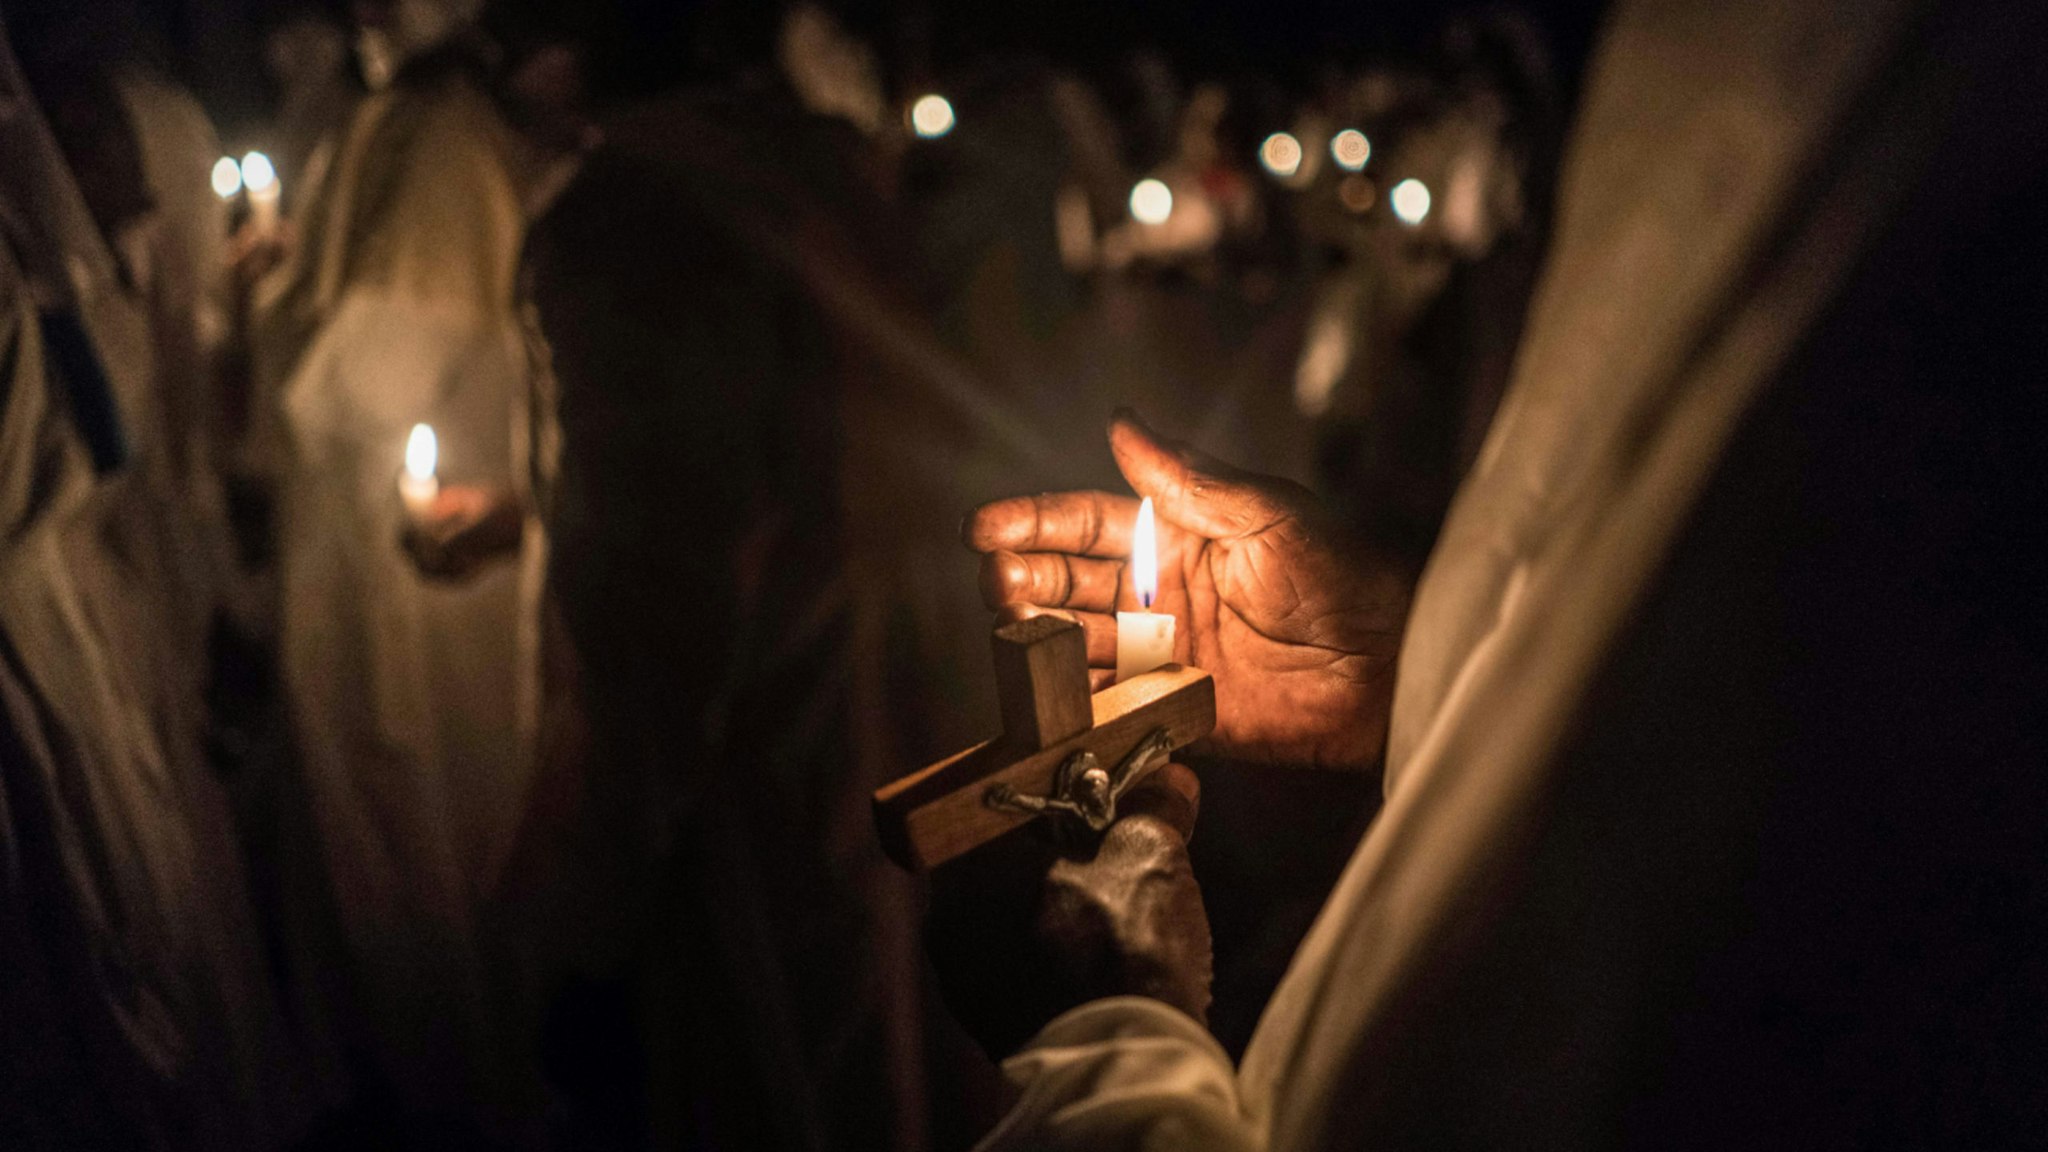 Believers of Legio Maria of African Church Mission hold candles during their overnight Christmas Mass at the church near Ugunja, the western part of Kenya, early December 25, 2017.